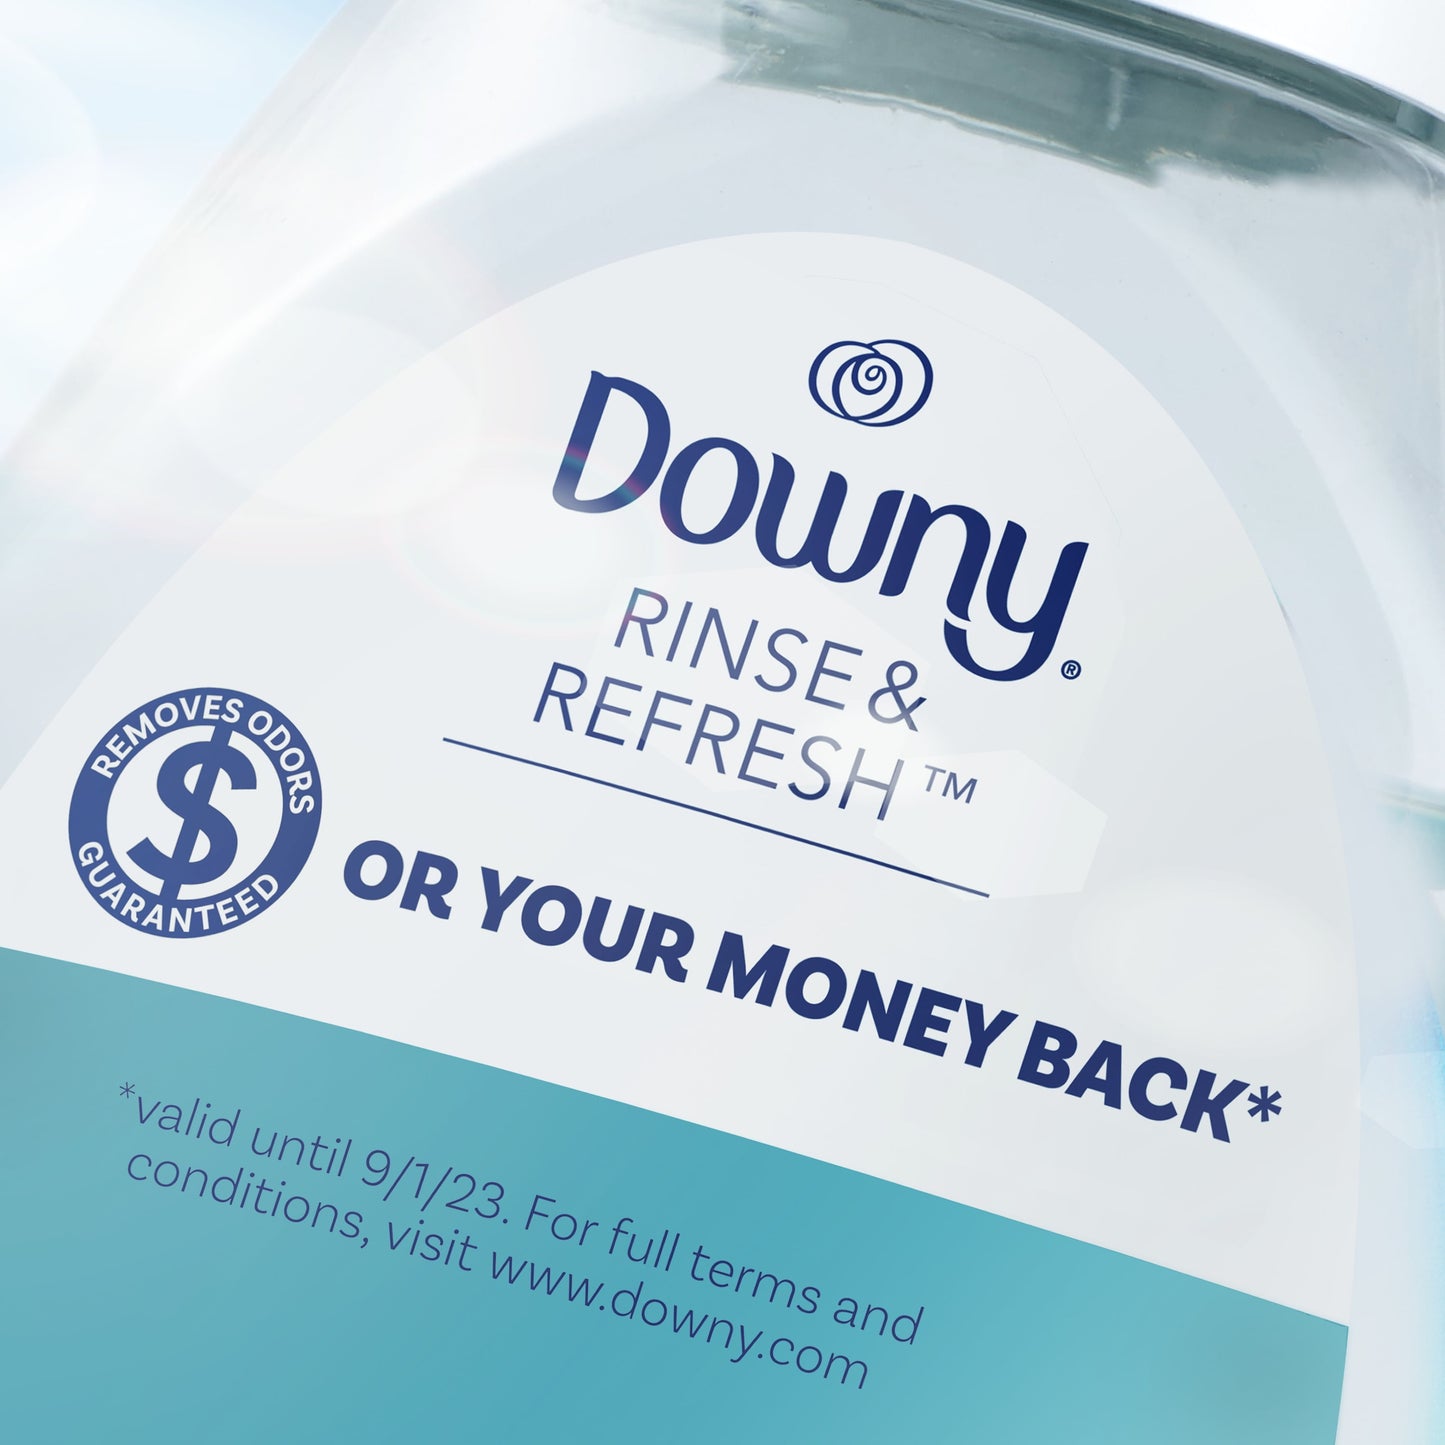 Downy Rinse & Refresh Liquid Laundry Odor Remover and Fabric Softener, Cool Cotton, 48.00 fl oz